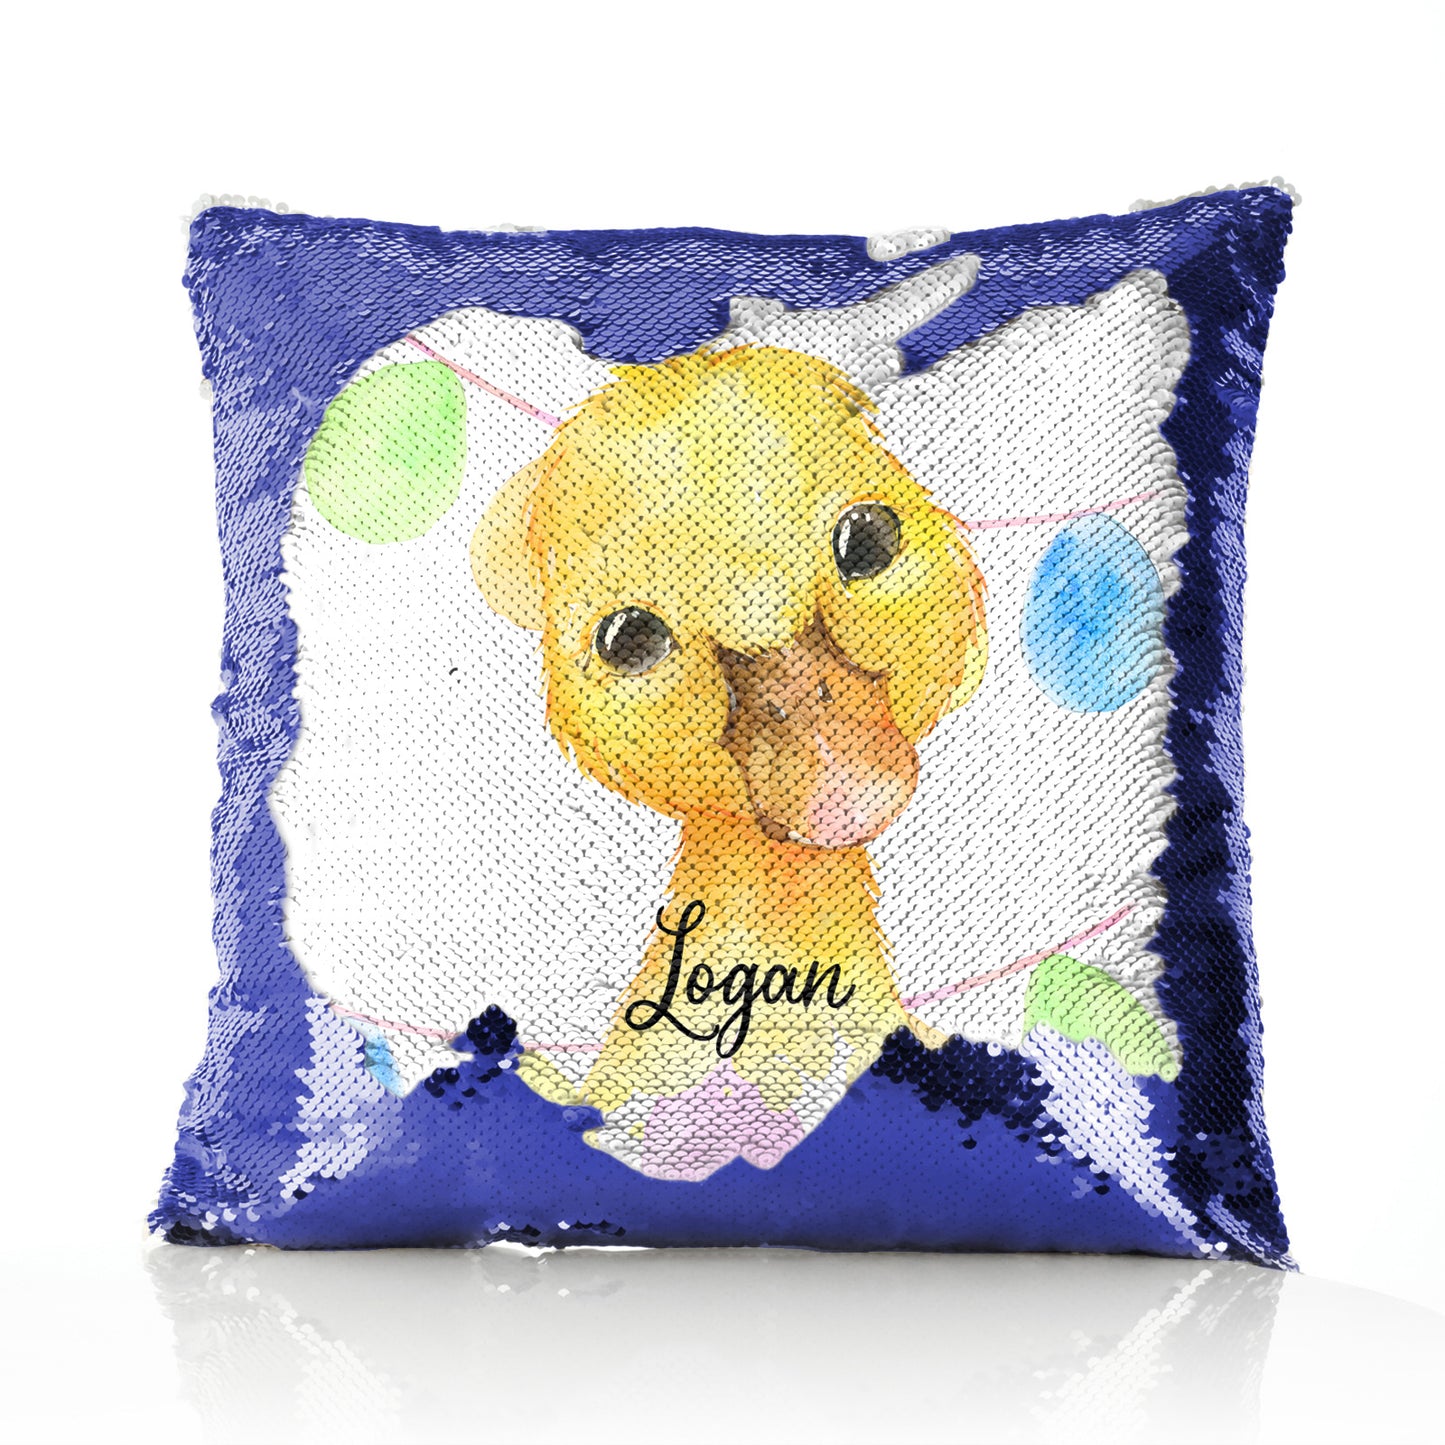 Personalised Sequin Cushion with Yellow Duck Multicolour Buntin and Cute Text